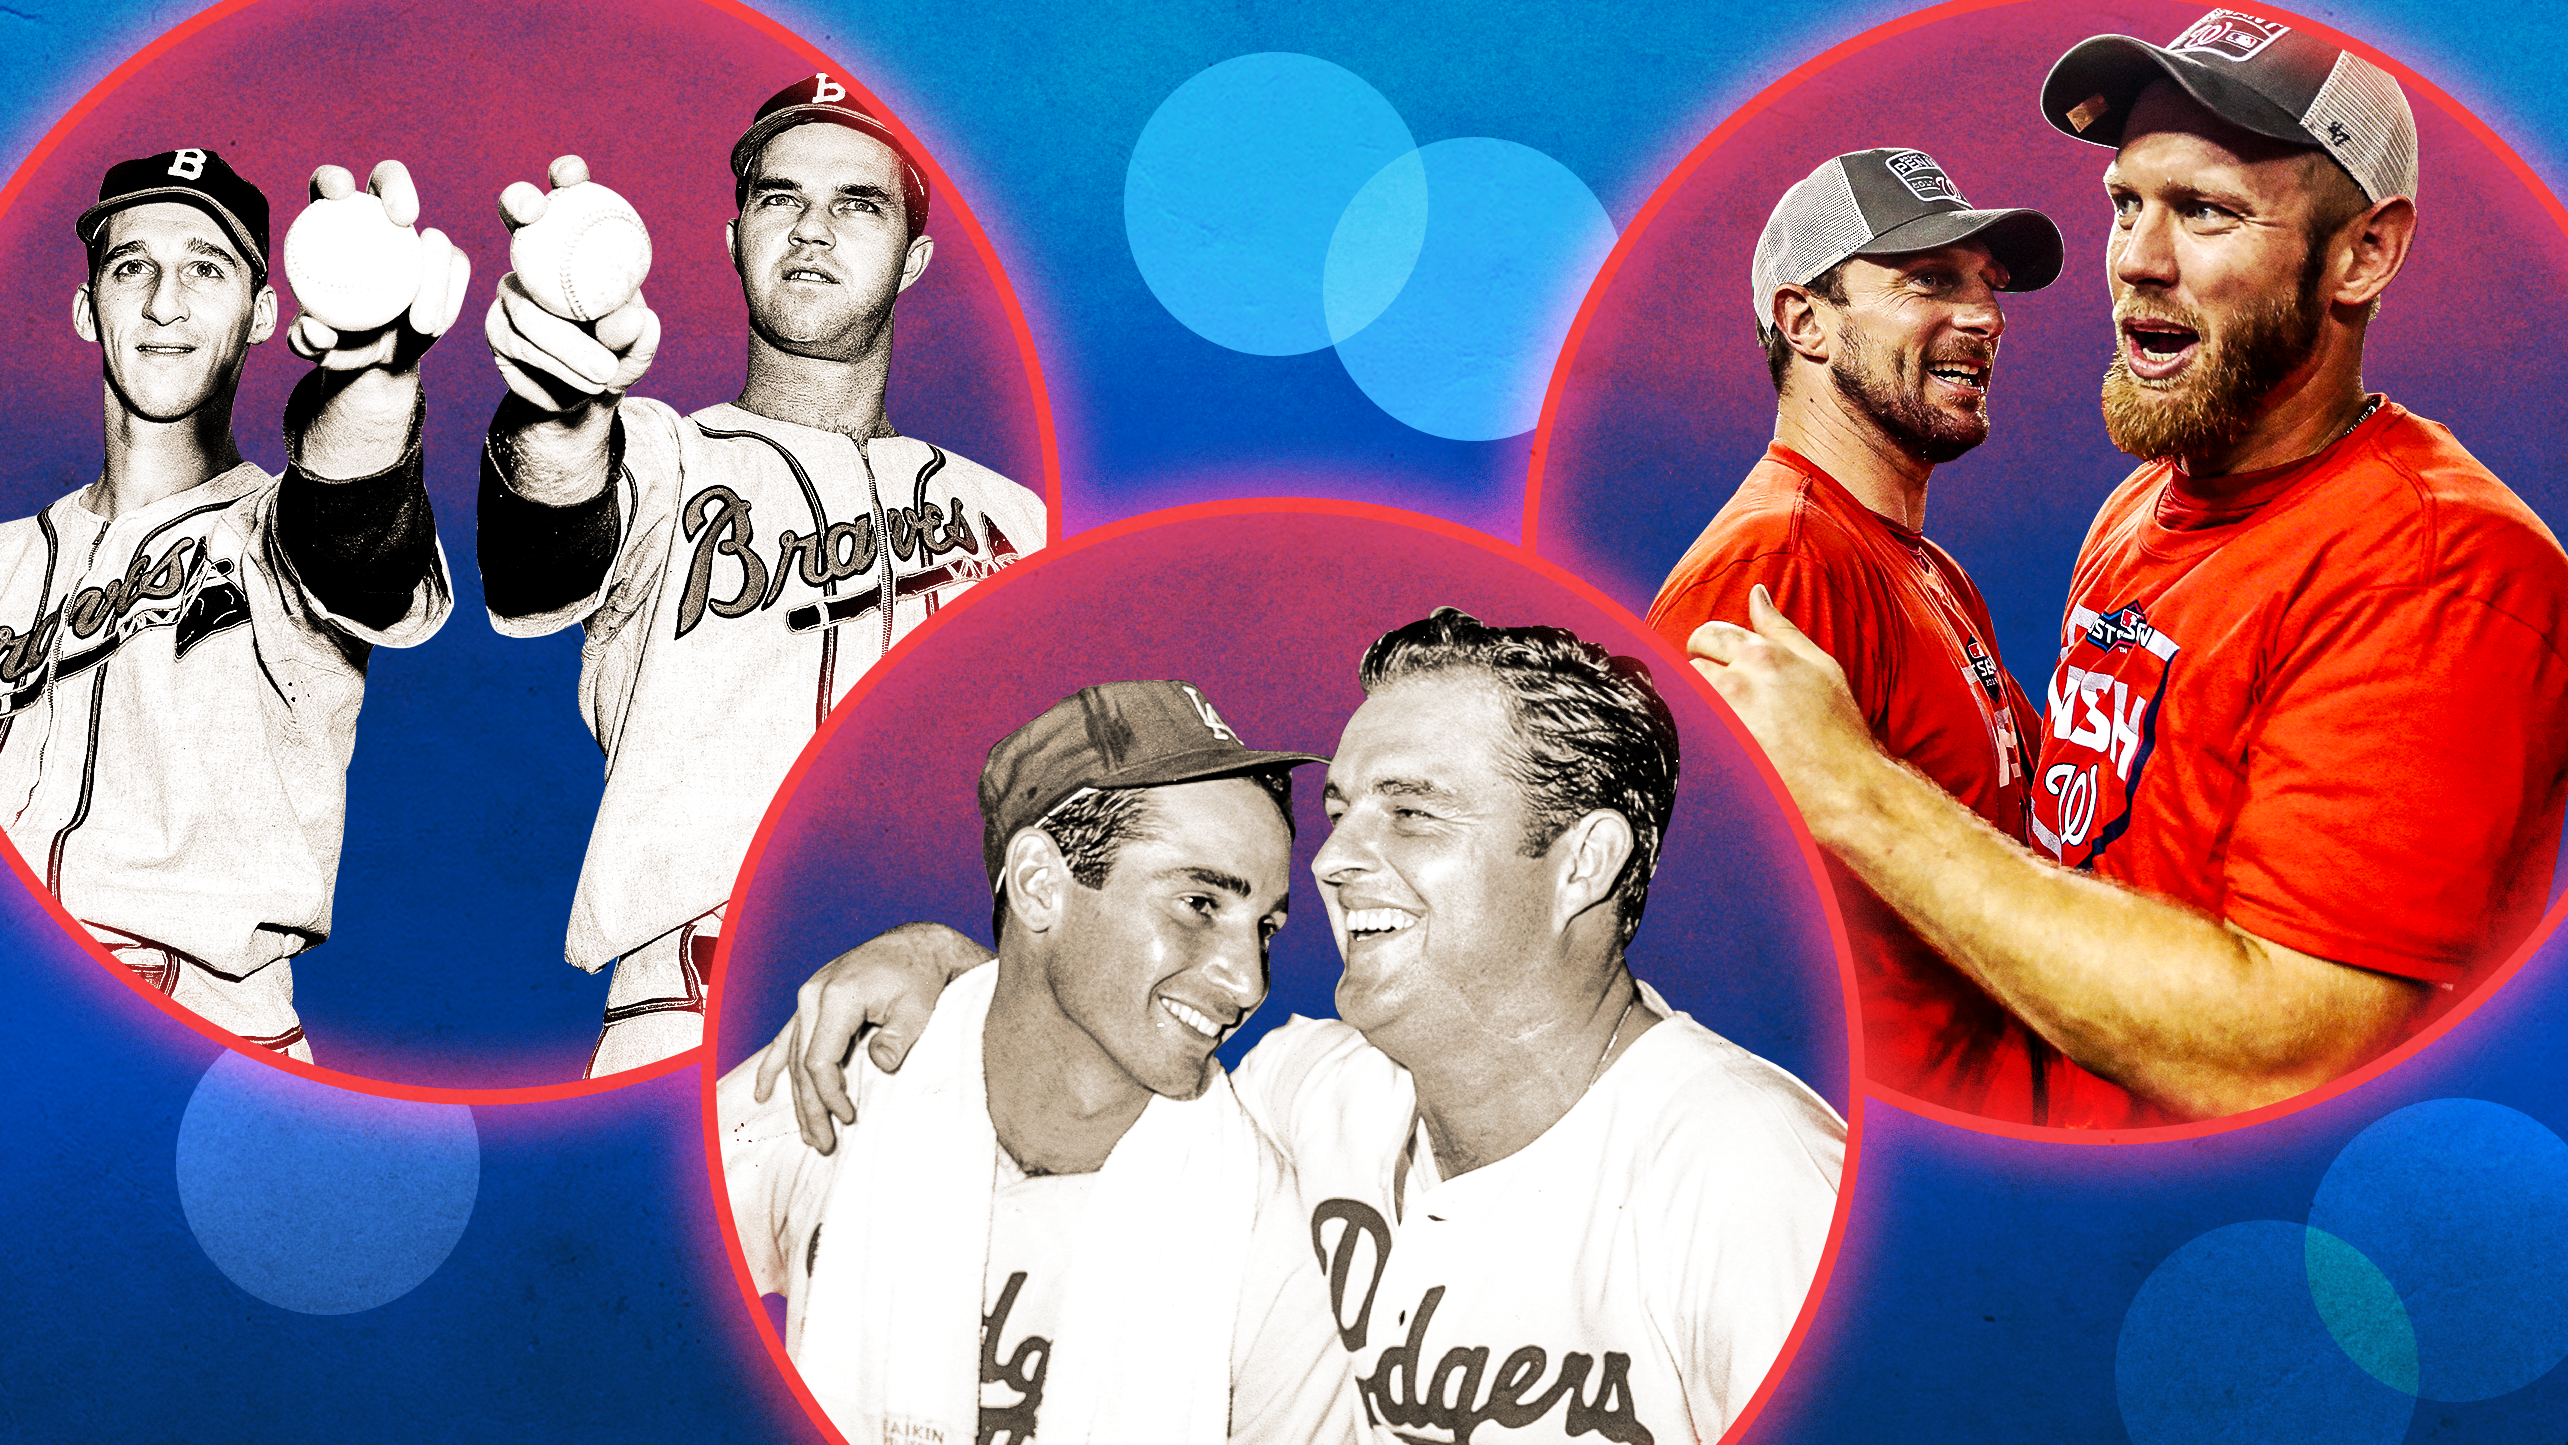 Spahn and Sain, Koufax and Drysdale, and Scherzer and Strasburg are among the best rotation duos in history